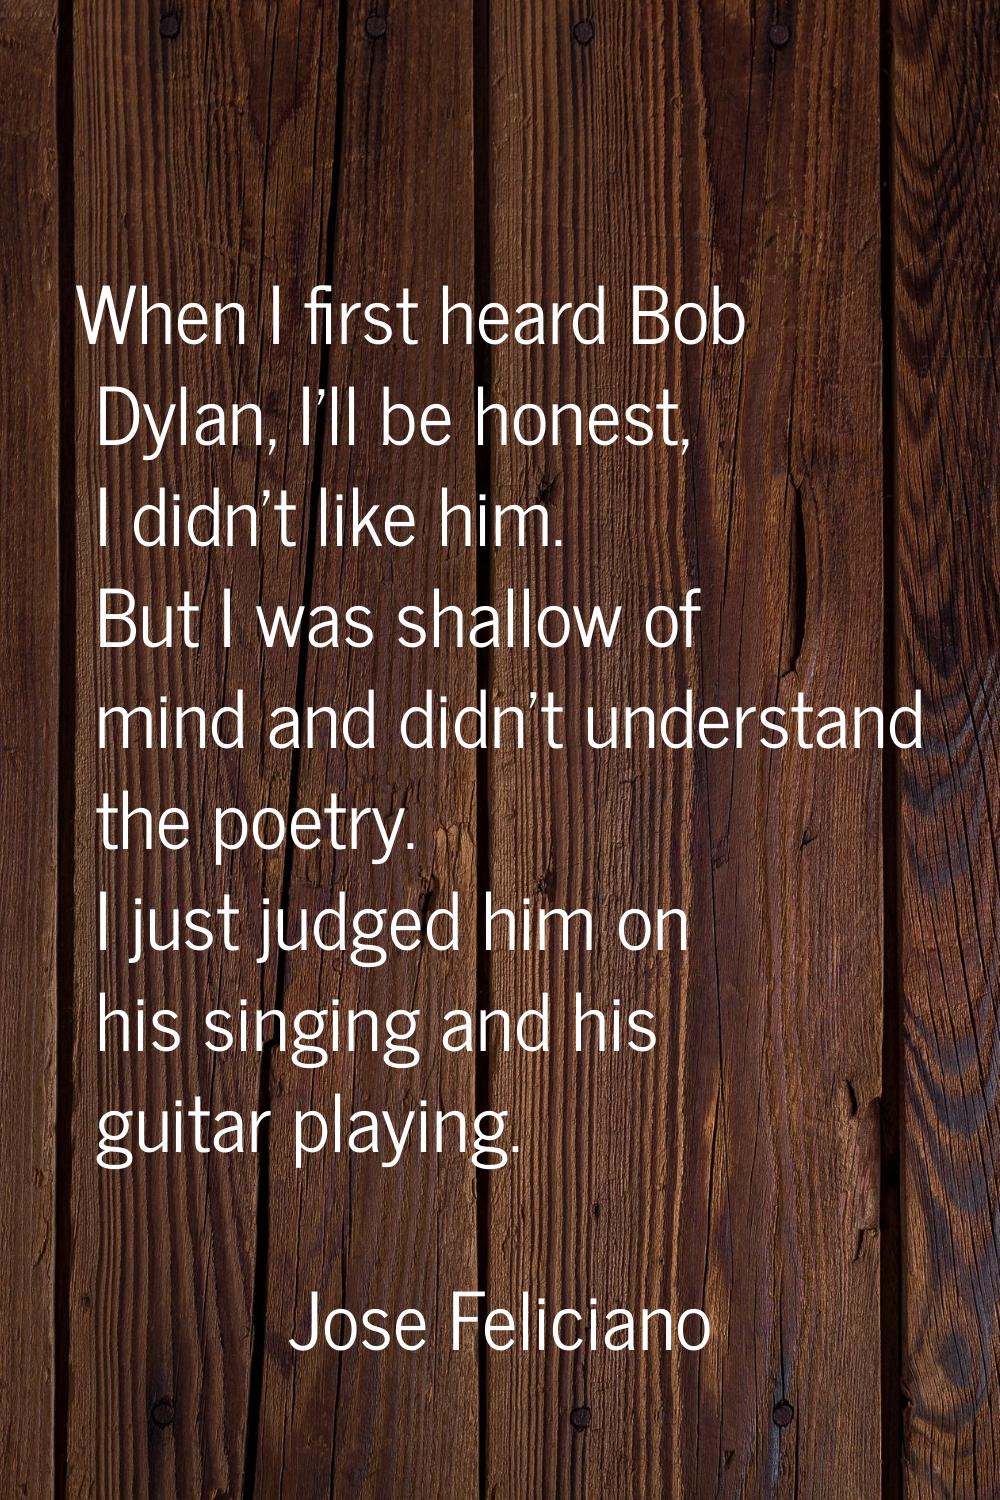 When I first heard Bob Dylan, I'll be honest, I didn't like him. But I was shallow of mind and didn